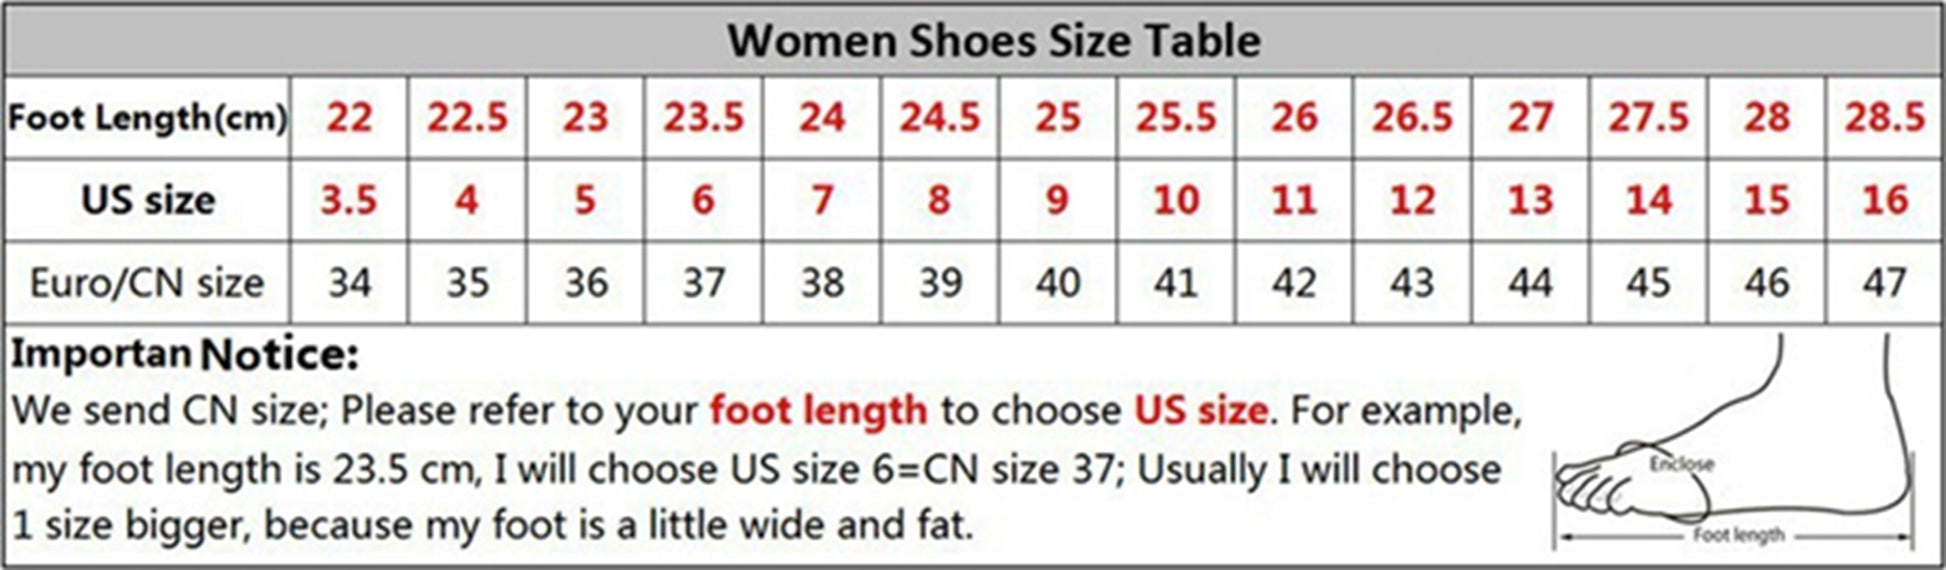 Women's Shoes Top Quality Flats Shoes For Woman Round Toe Slip On Shoes Genuine Leather Loafers Shallow Soft Shoes - LiveTrendsX